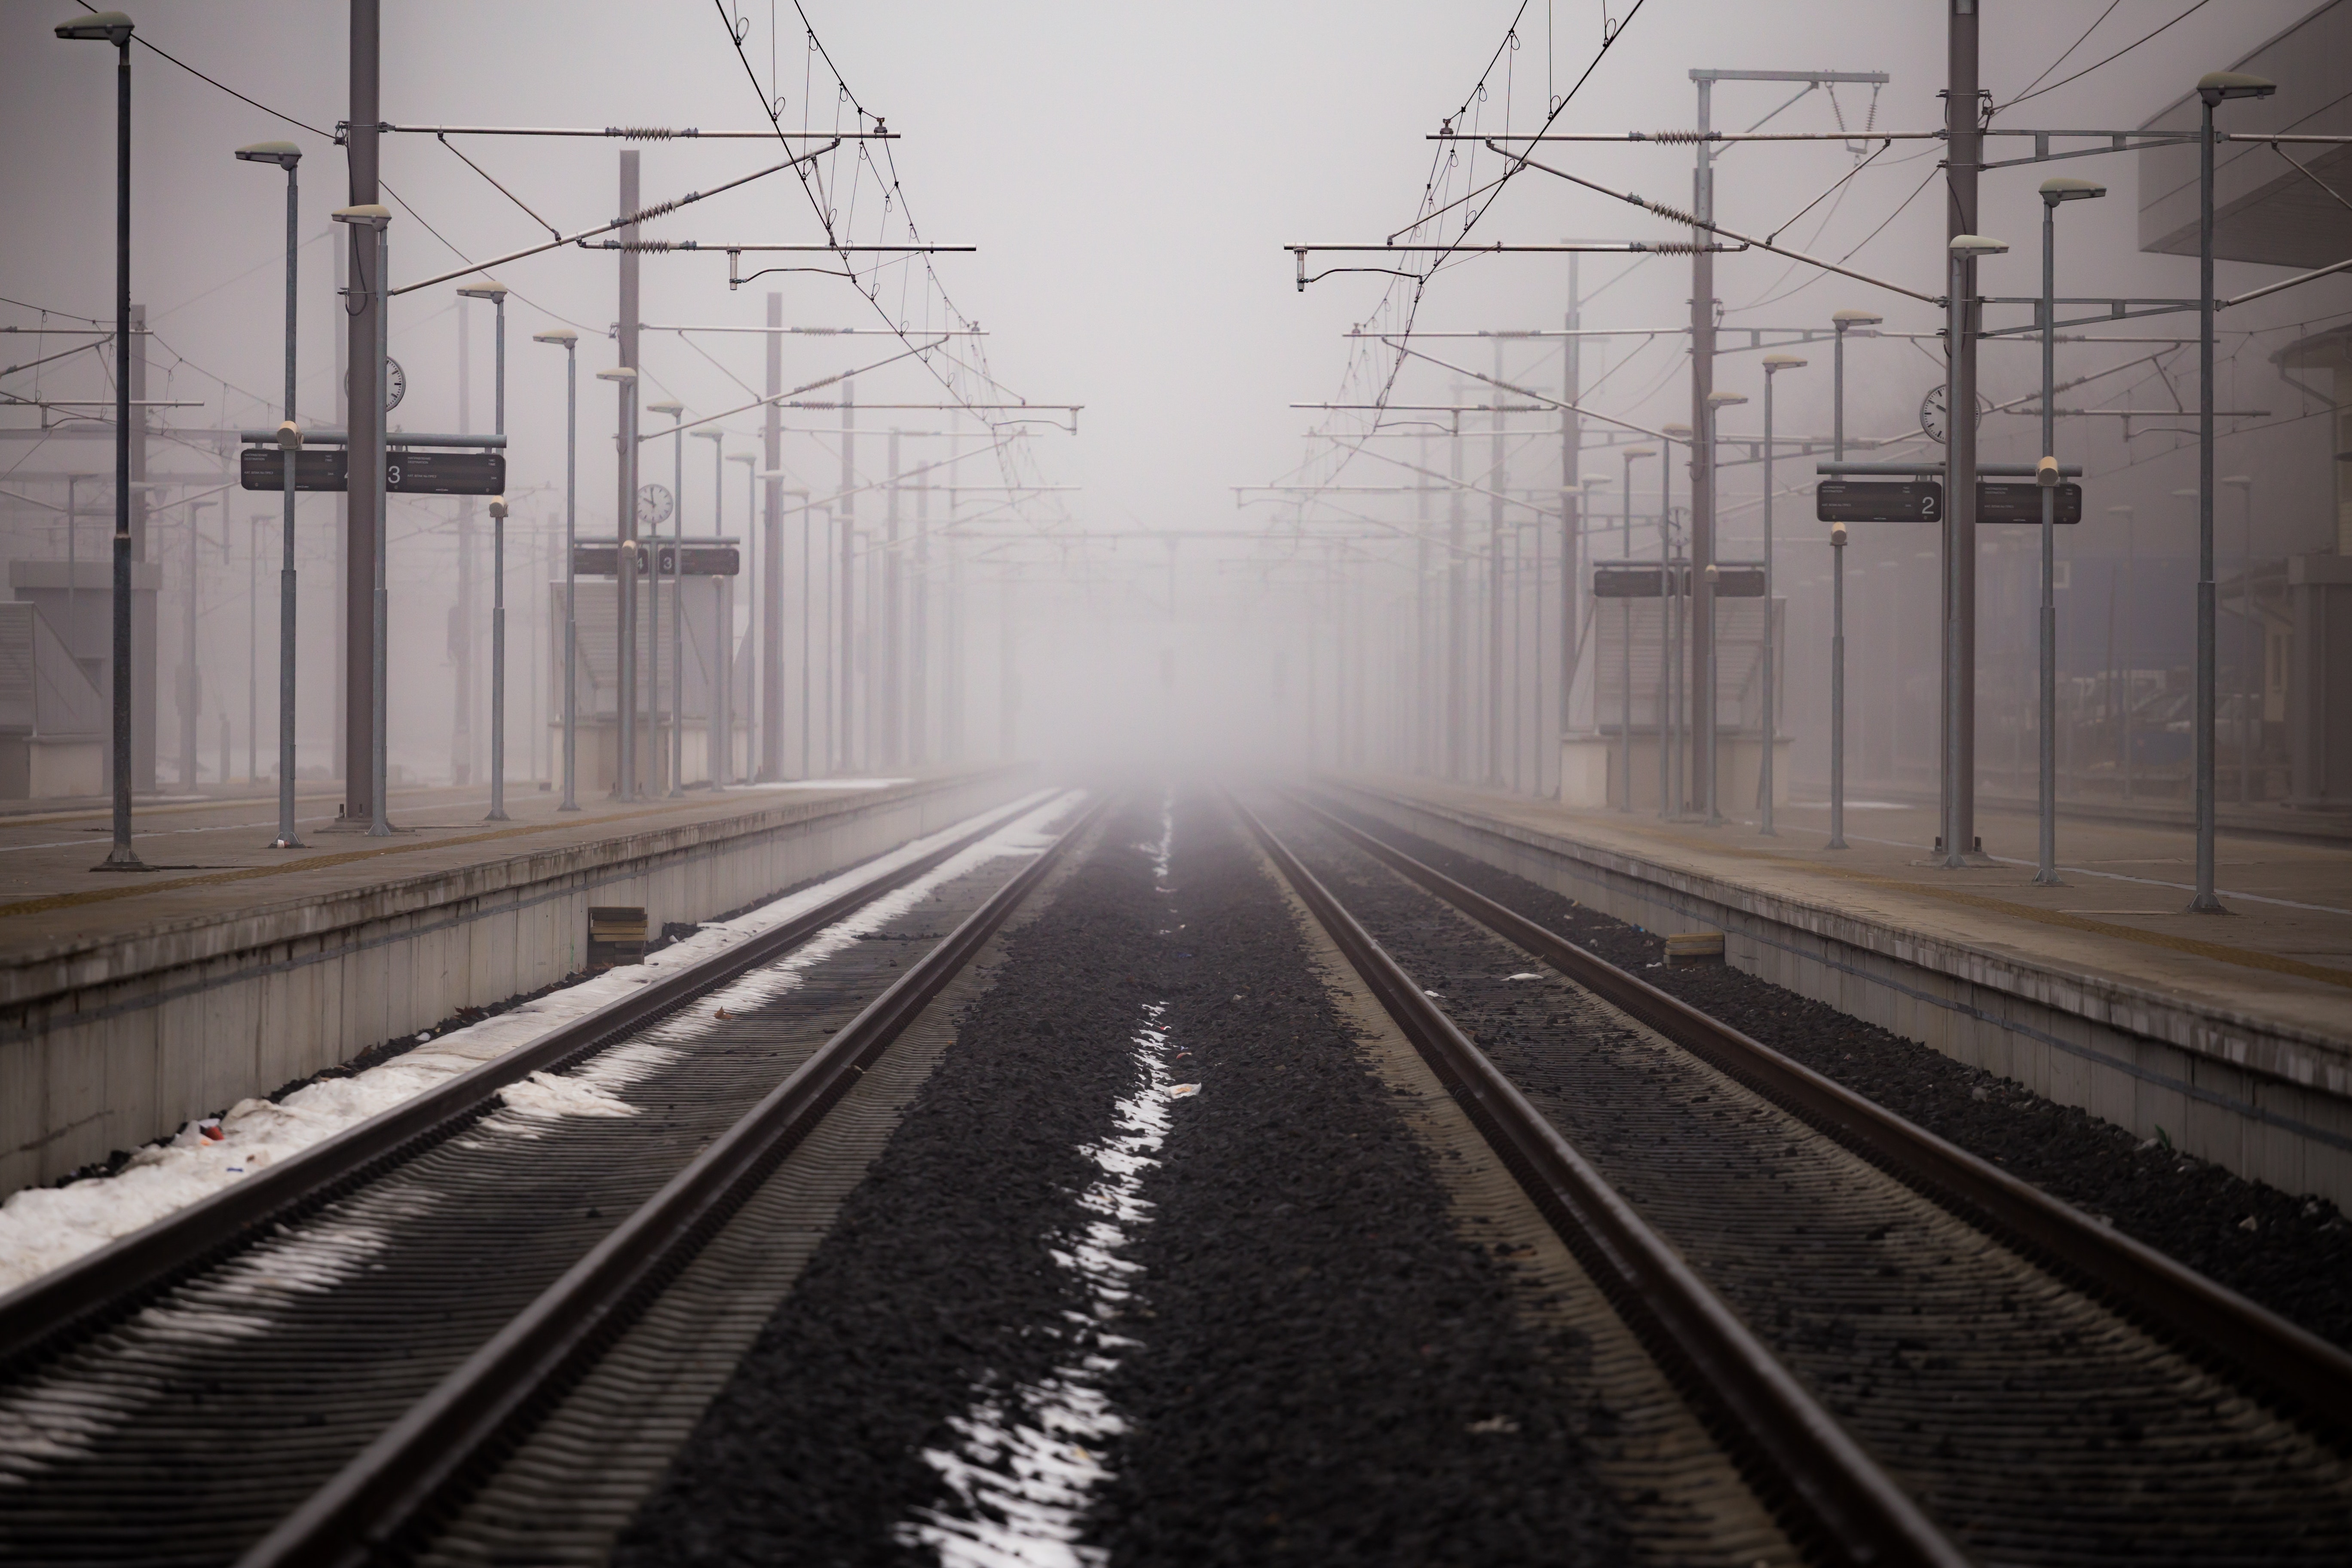 railway, nature, pebble, fog, wires, wire, crushed stone, macadam cellphone